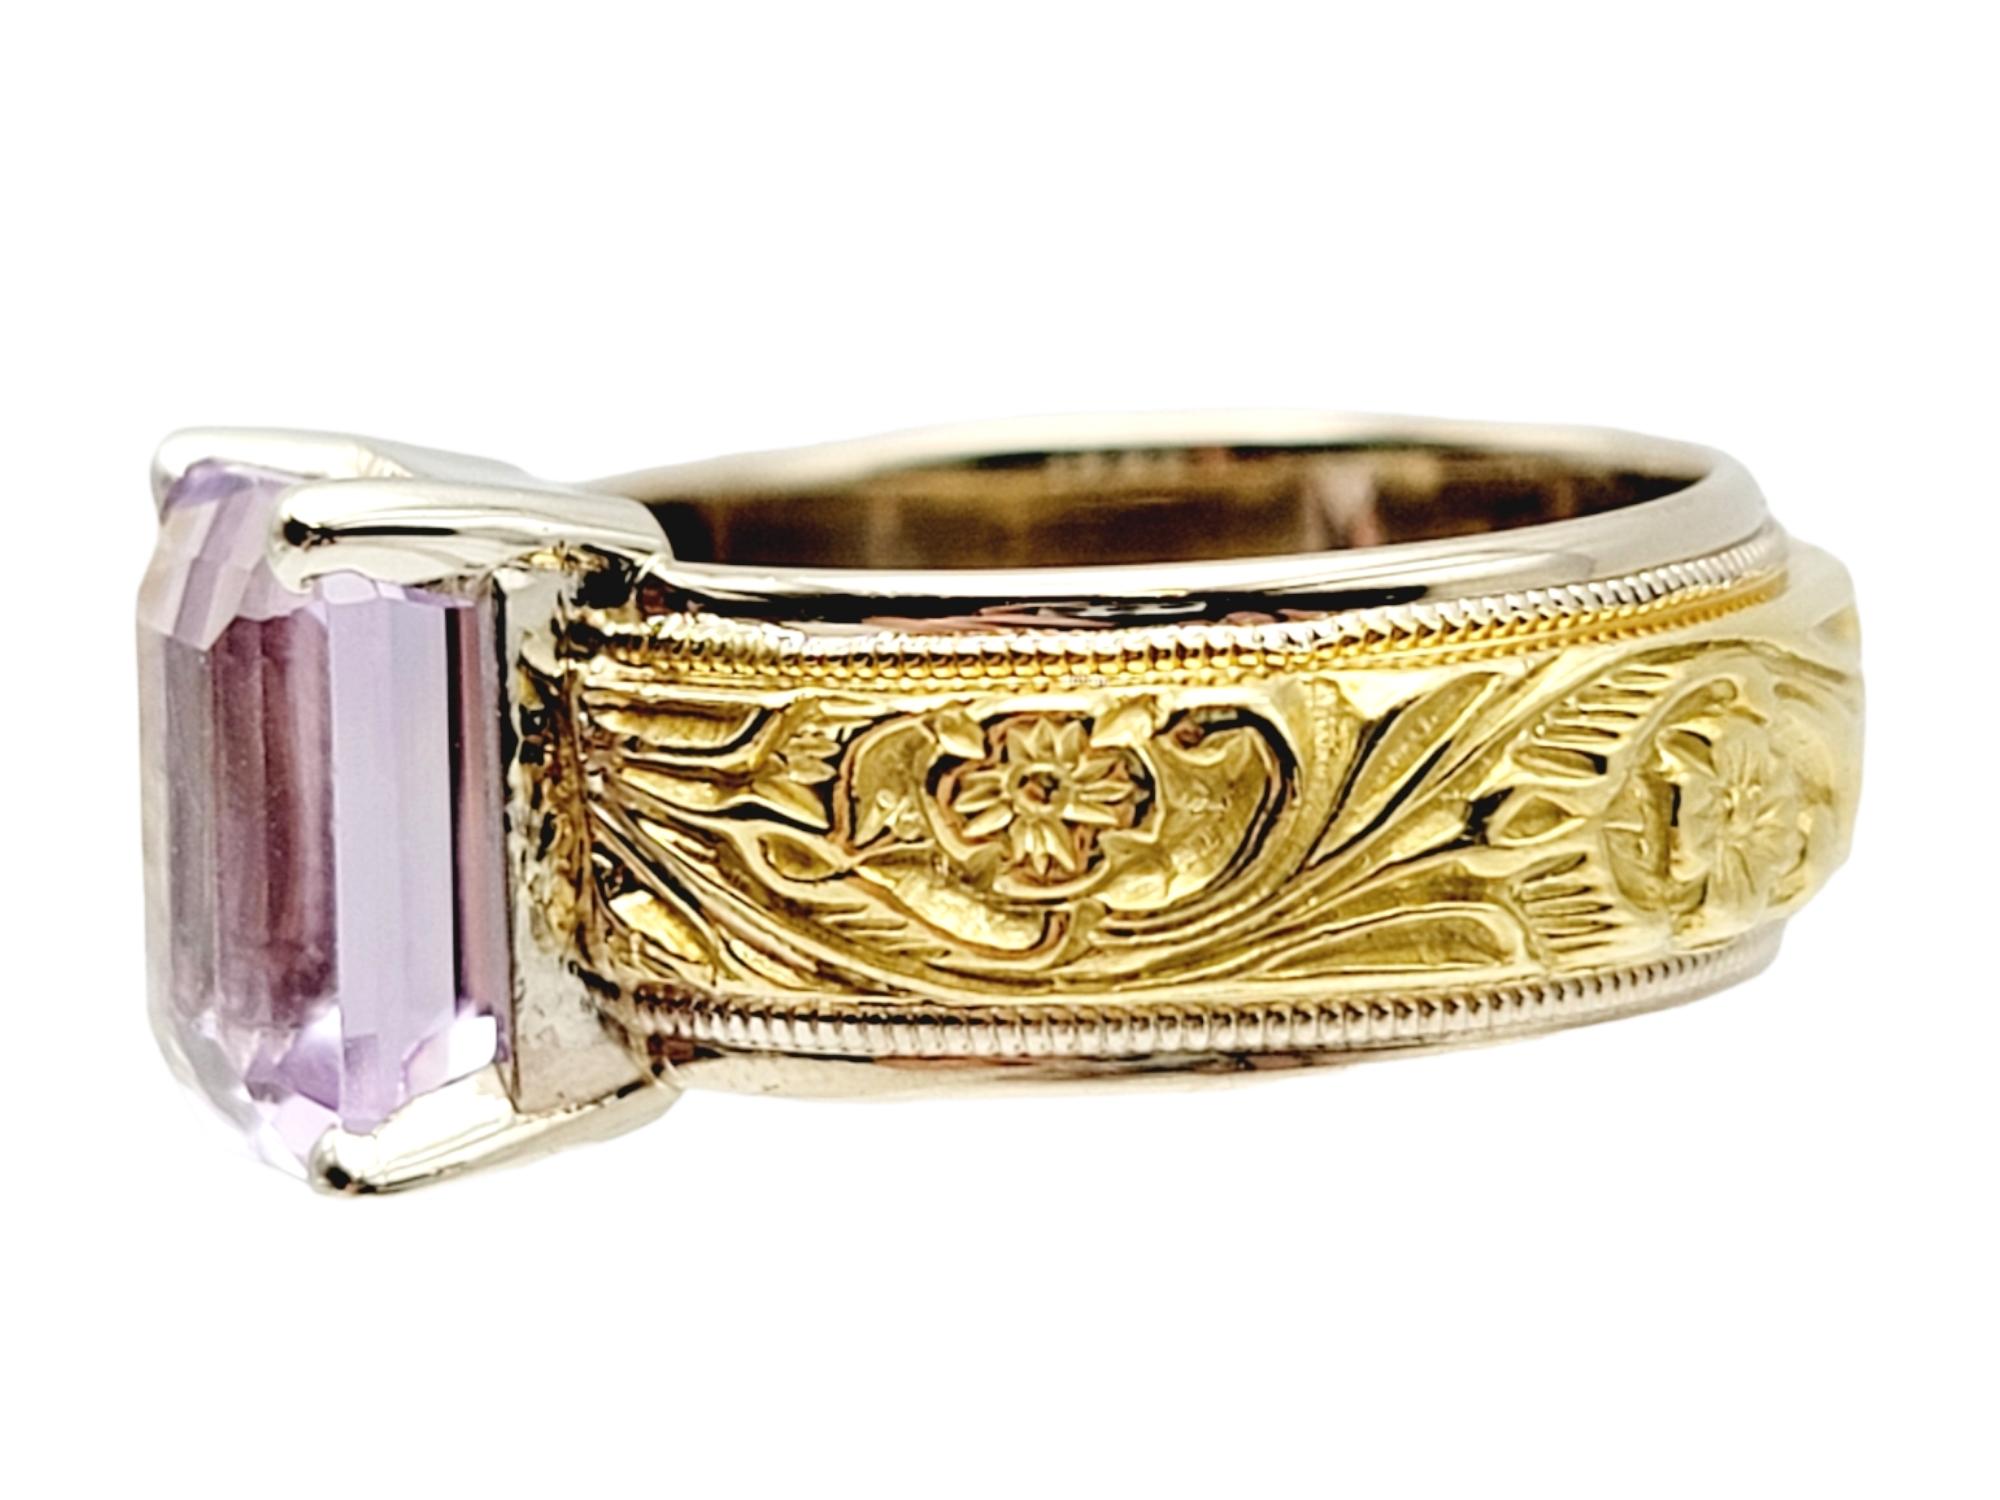 Ring size: 5

Beautiful vintage inspired amethyst band ring. Romantic and feminine, this unique ring would make a gorgeous addition to the special someone in your life.  

This pretty piece features a single prong set light purple emerald cut